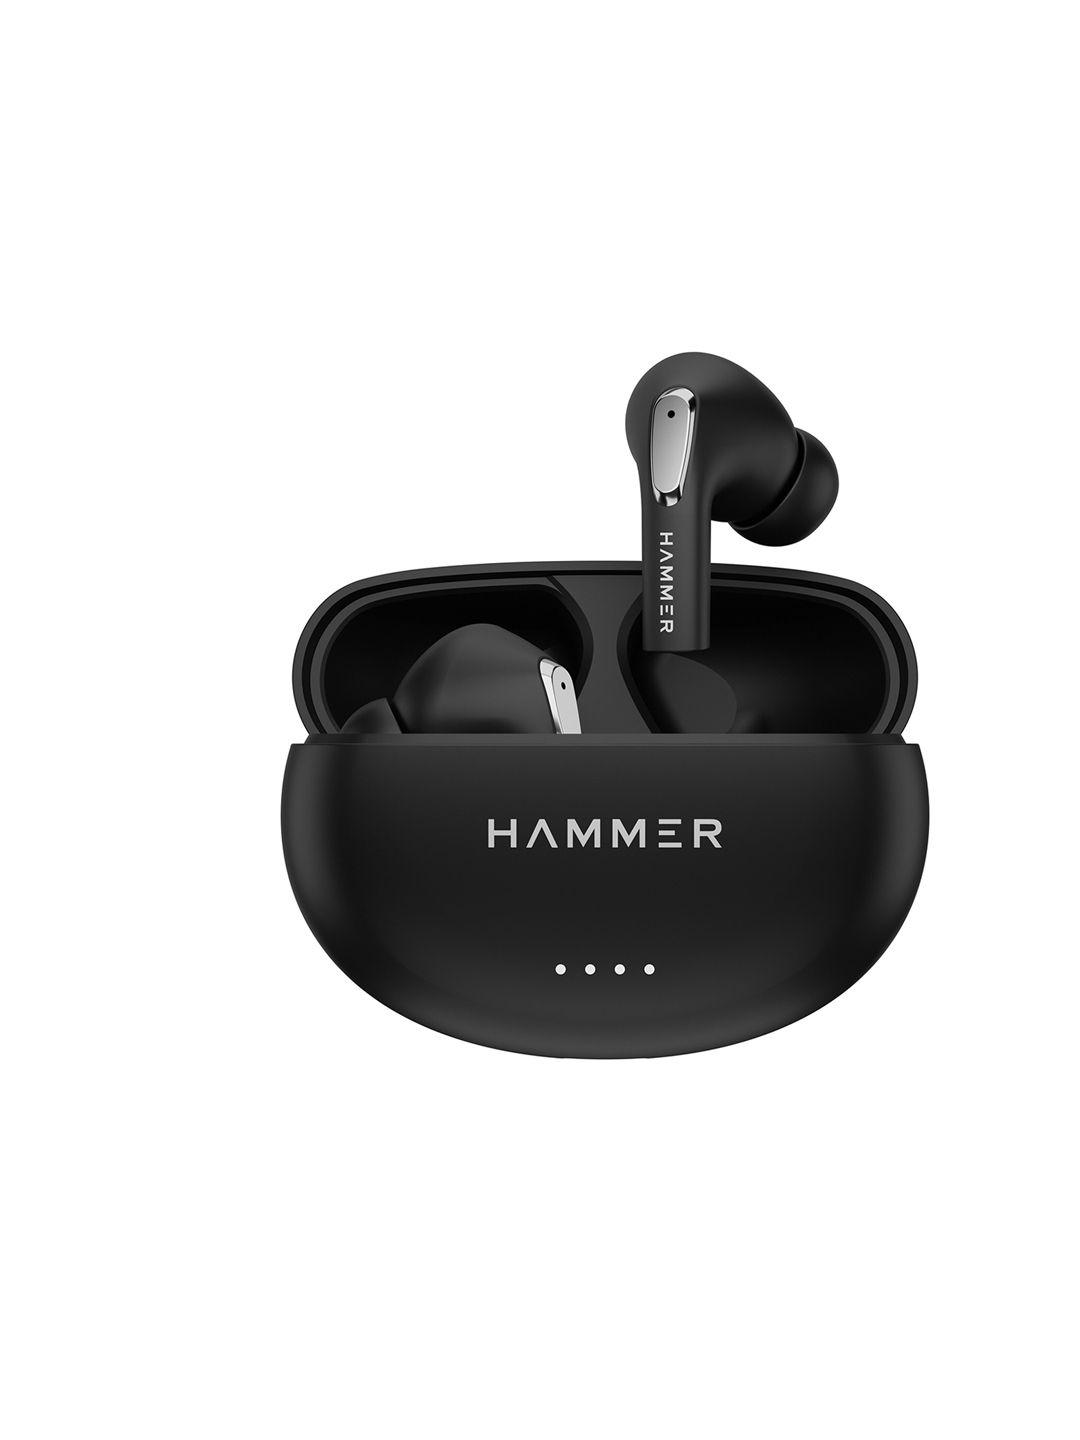 hammer mini pods tws earbuds with touch controls